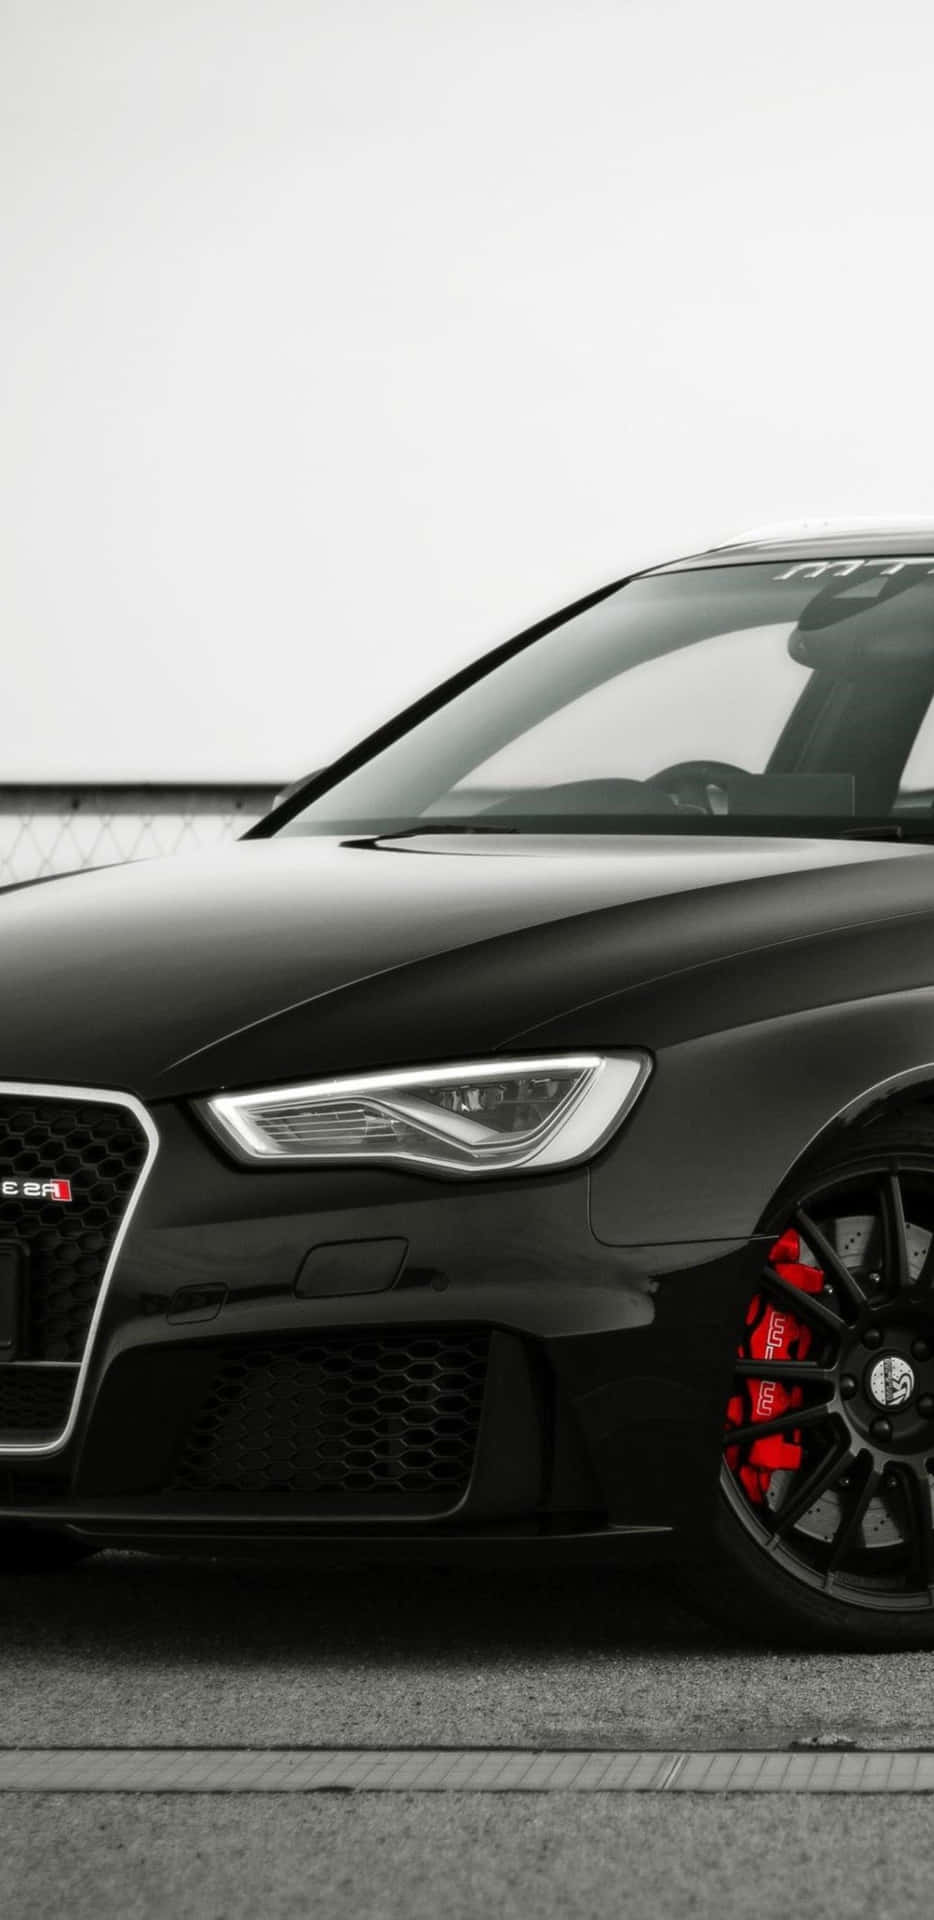 Captivating Audi RS3 Sportback in Action Wallpaper